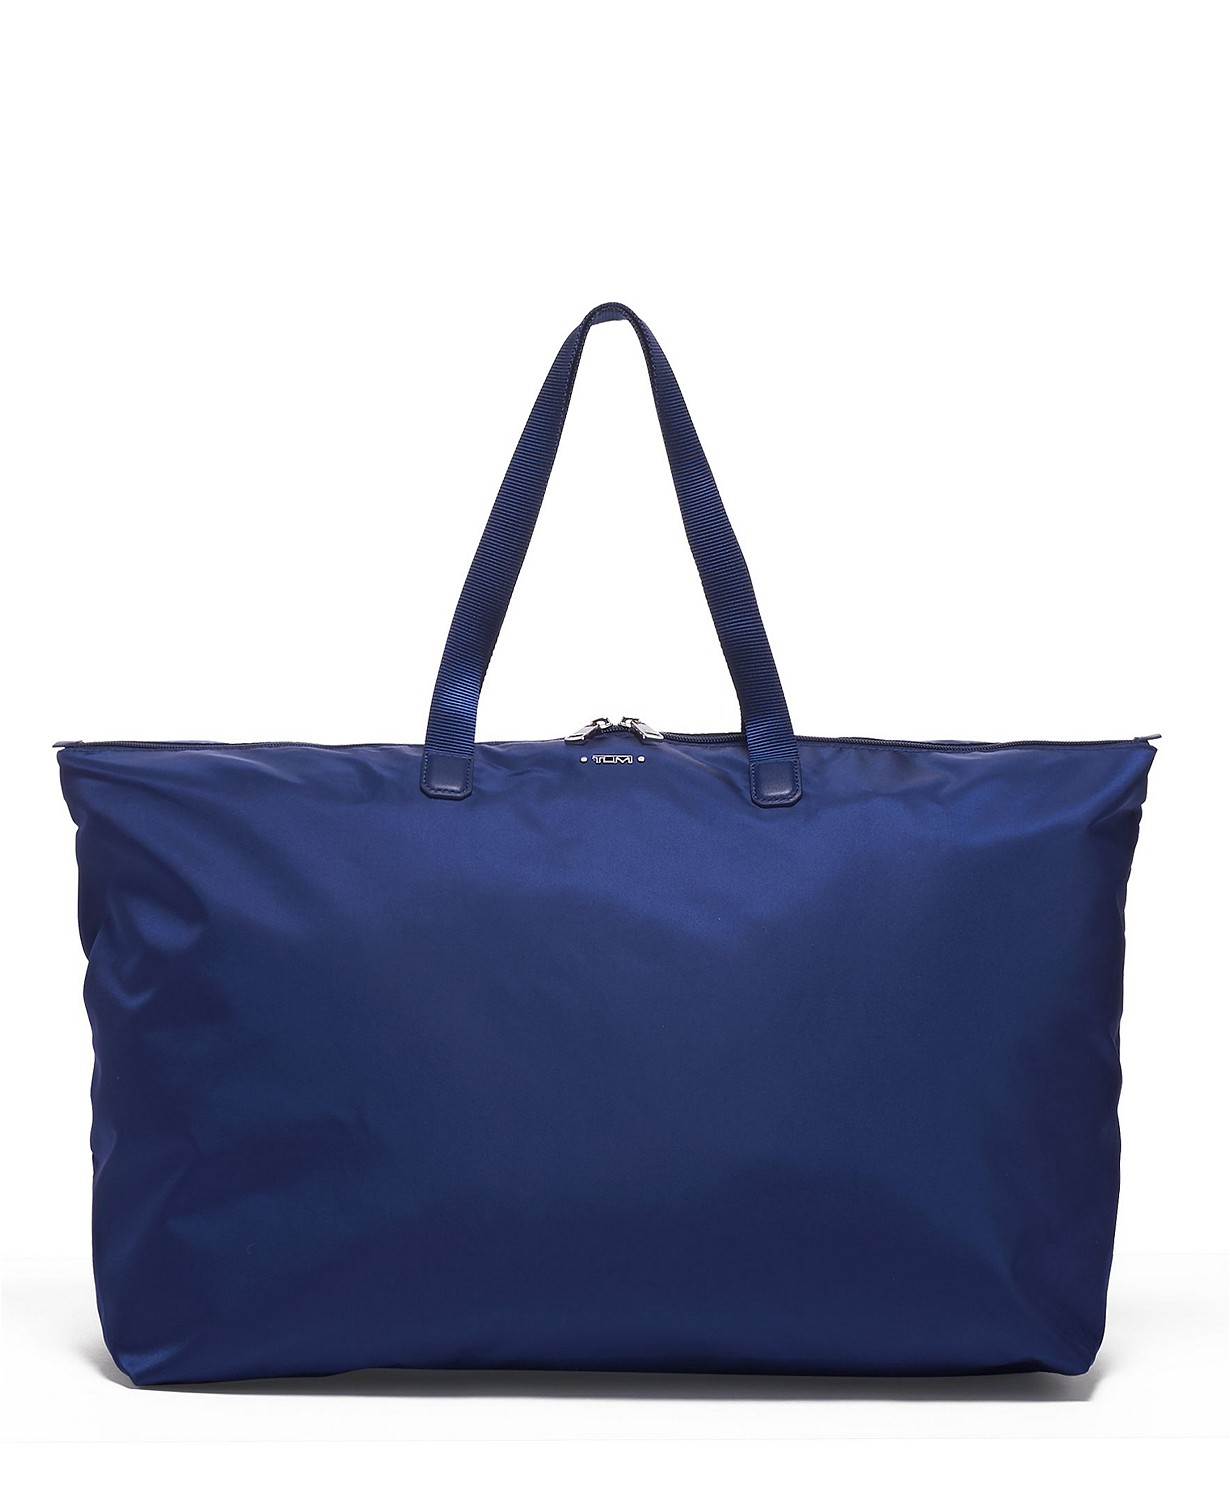 Navy Just In Case Tote, $69 at Macy's